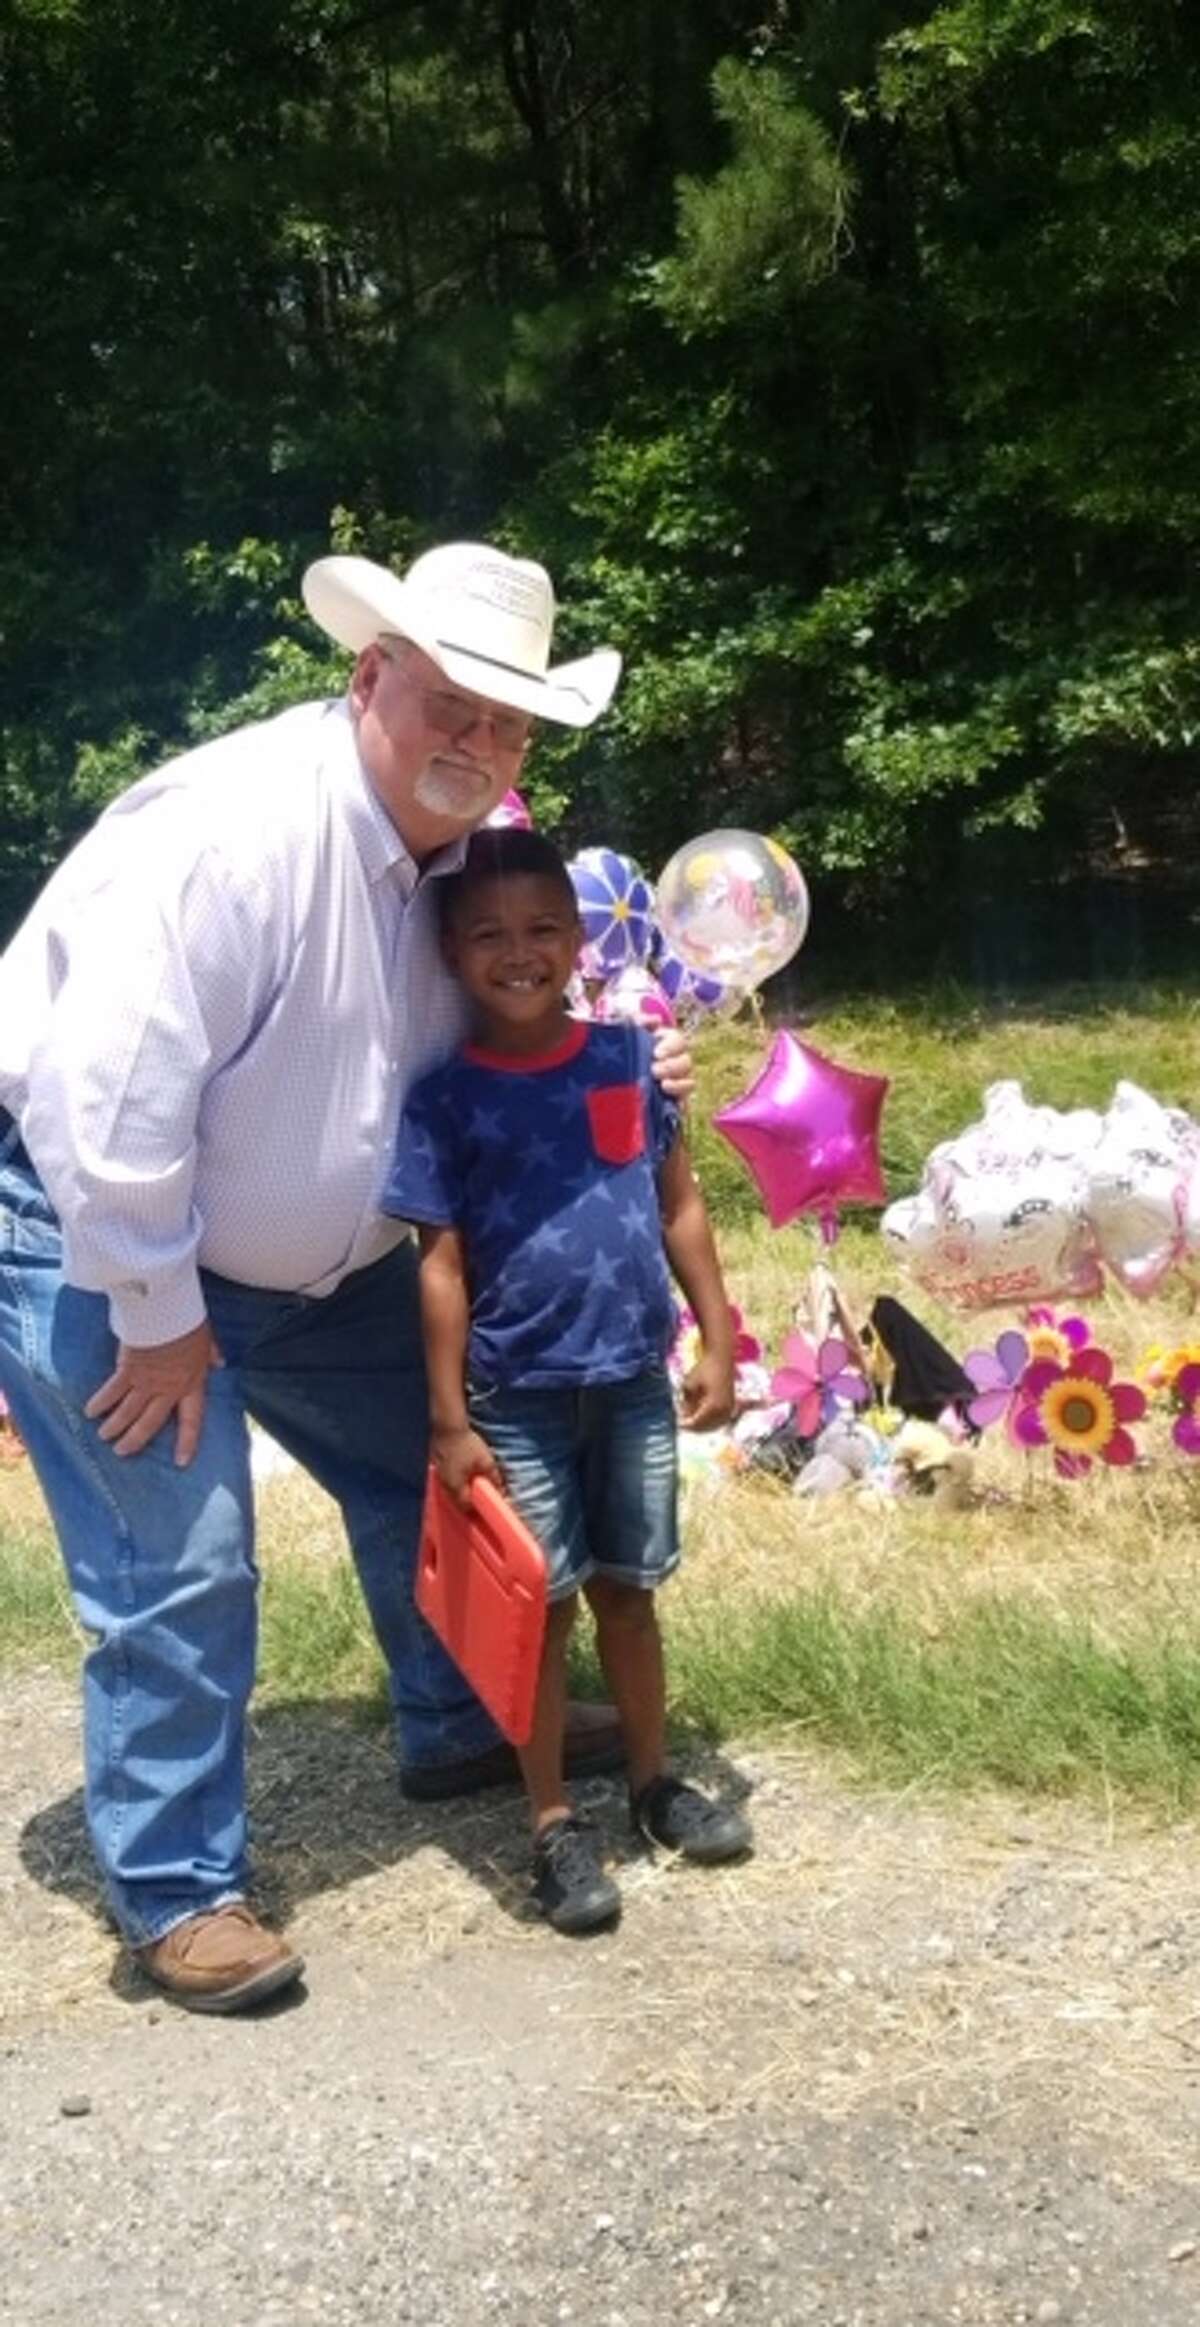 Singleton (left) said he saw people who drove more than 50 miles to pay their respects. Here he posed with Kason Lewis, whose traveled 60 miles with his mother to place a teddy bear and flowers at the site.